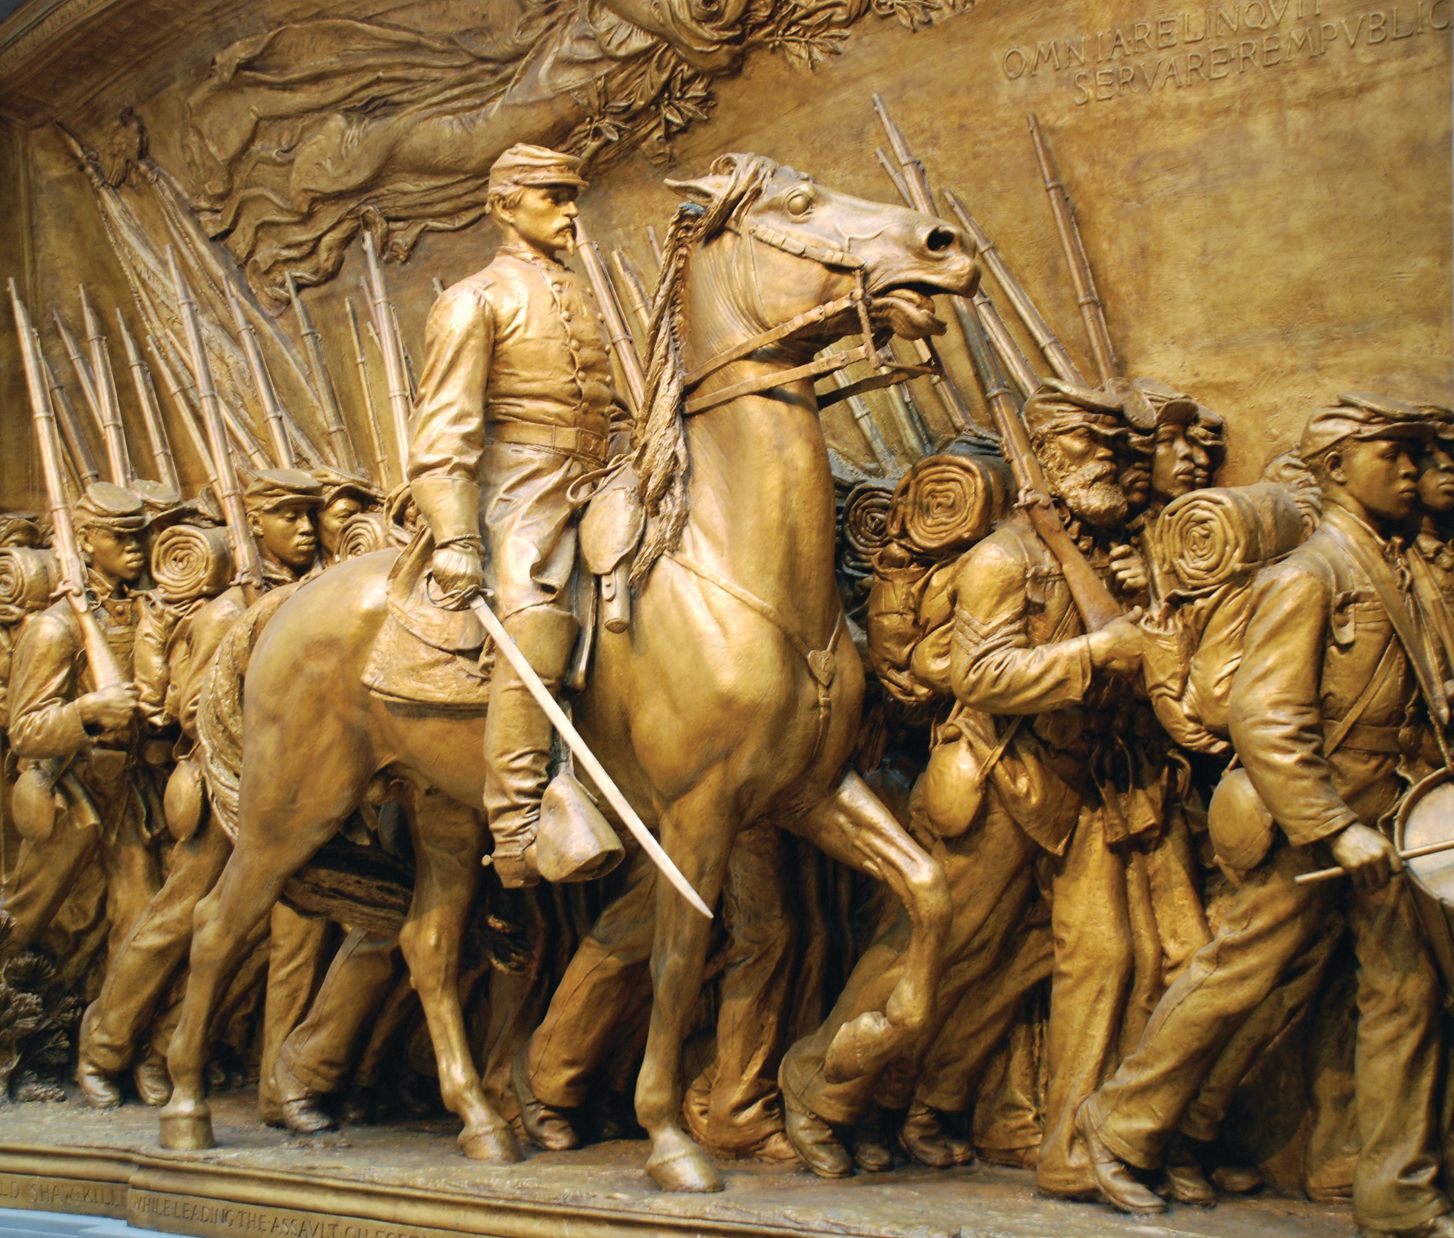 The Robert Gould Shaw Memorial in Boston immortalizes the colonel and the 54th Massachusetts by capturing the time in May 1863 when they marched down Beacon Street.